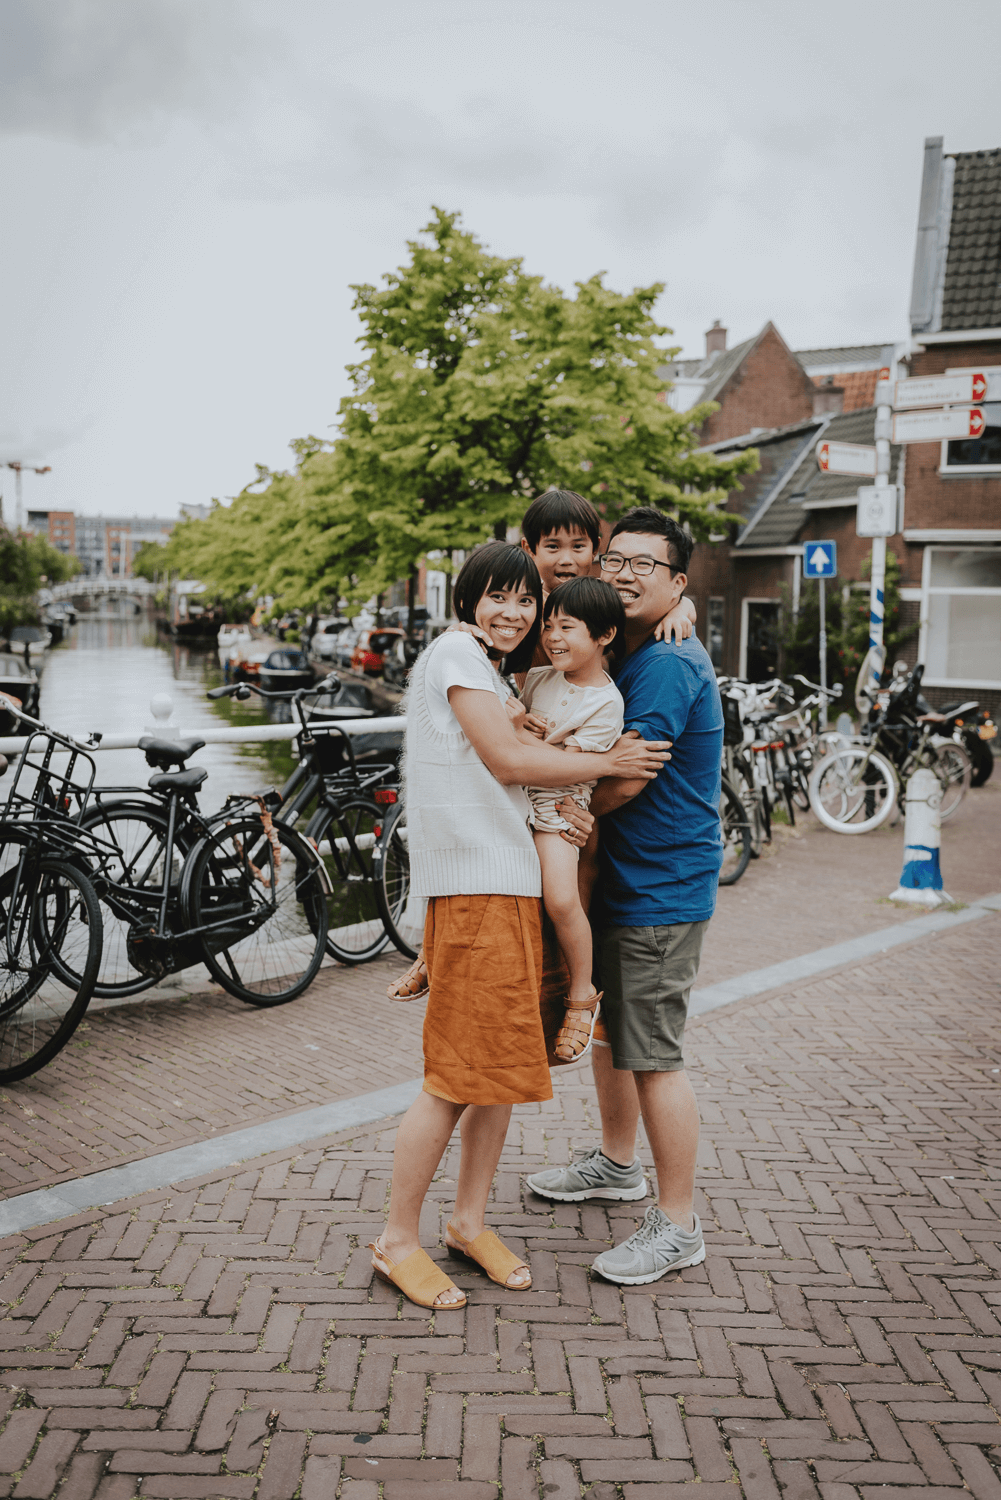 Summer holiday photos in Haarlem by Vicky McLachlan Photography_18